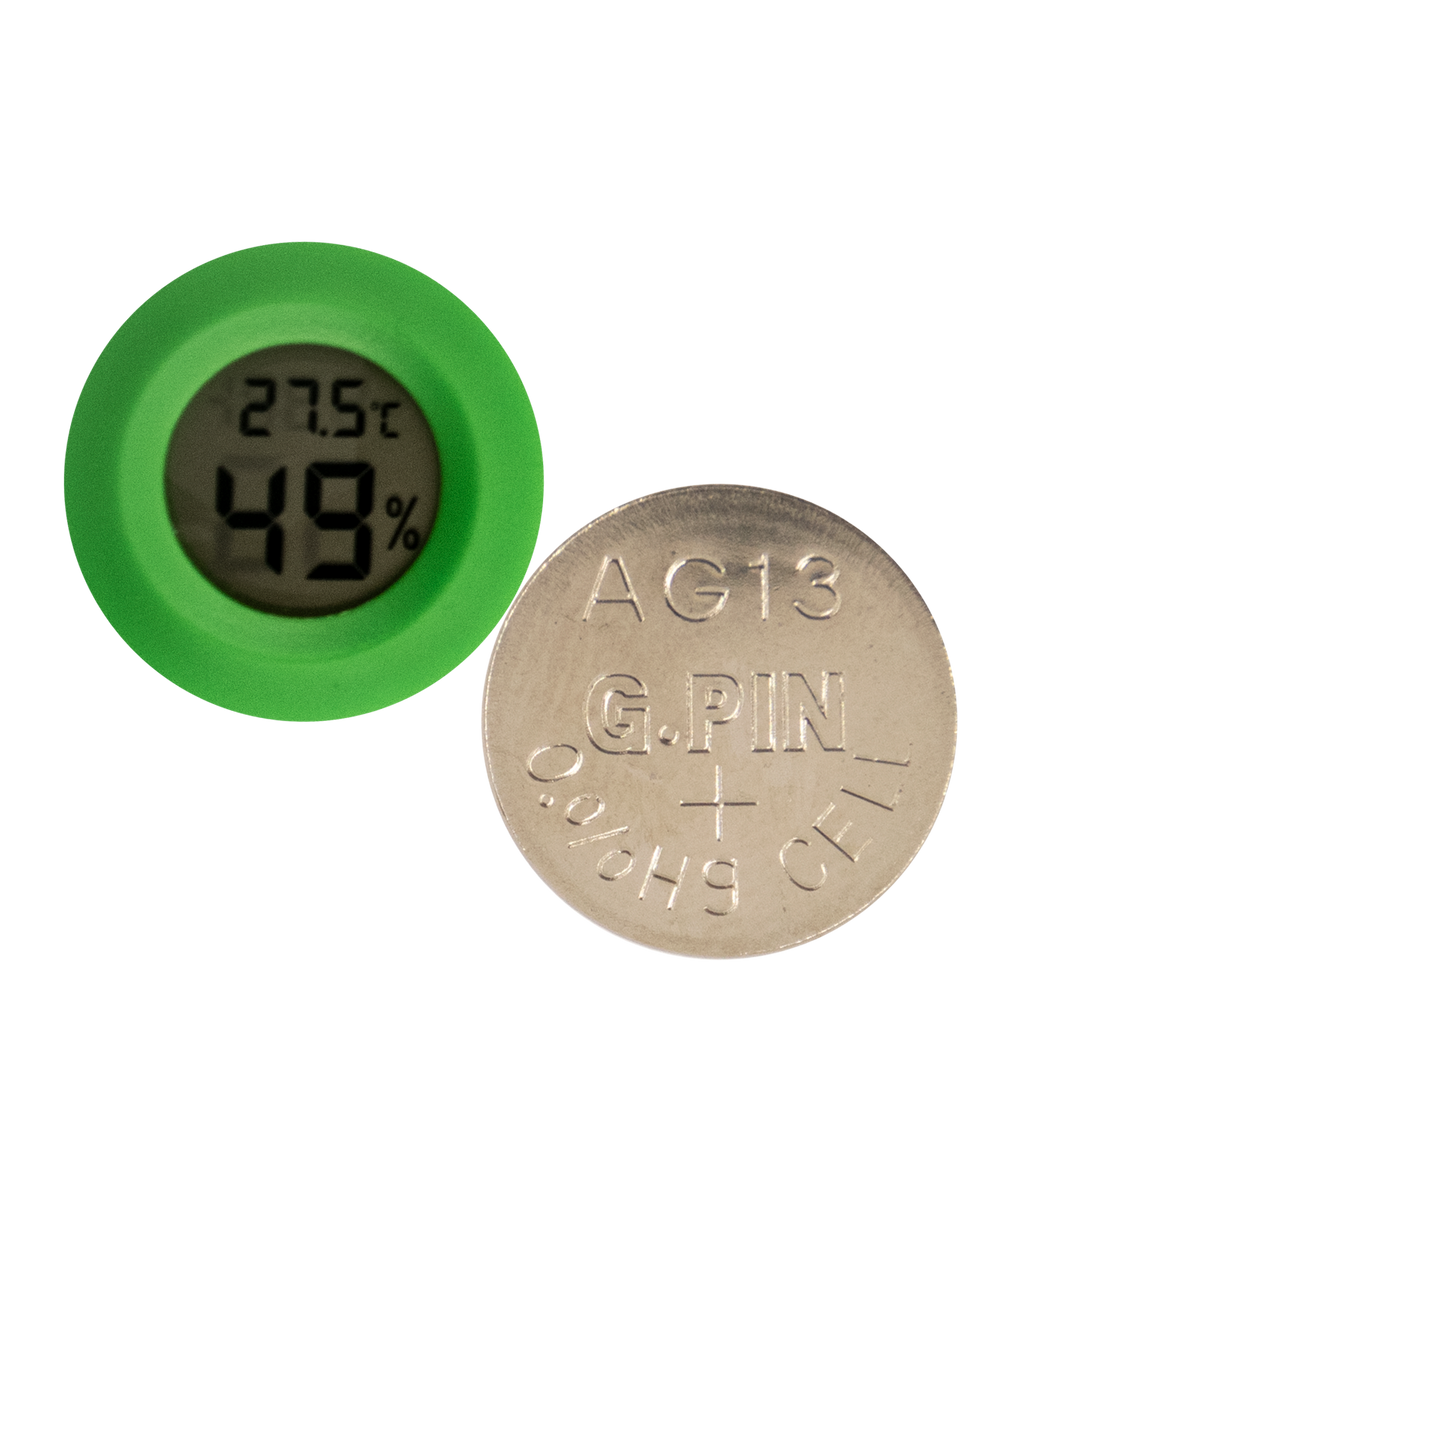 Thermometer Hygrometer with a Spare Button Battery Used for Warm/Creality 3D Printer Enclosure